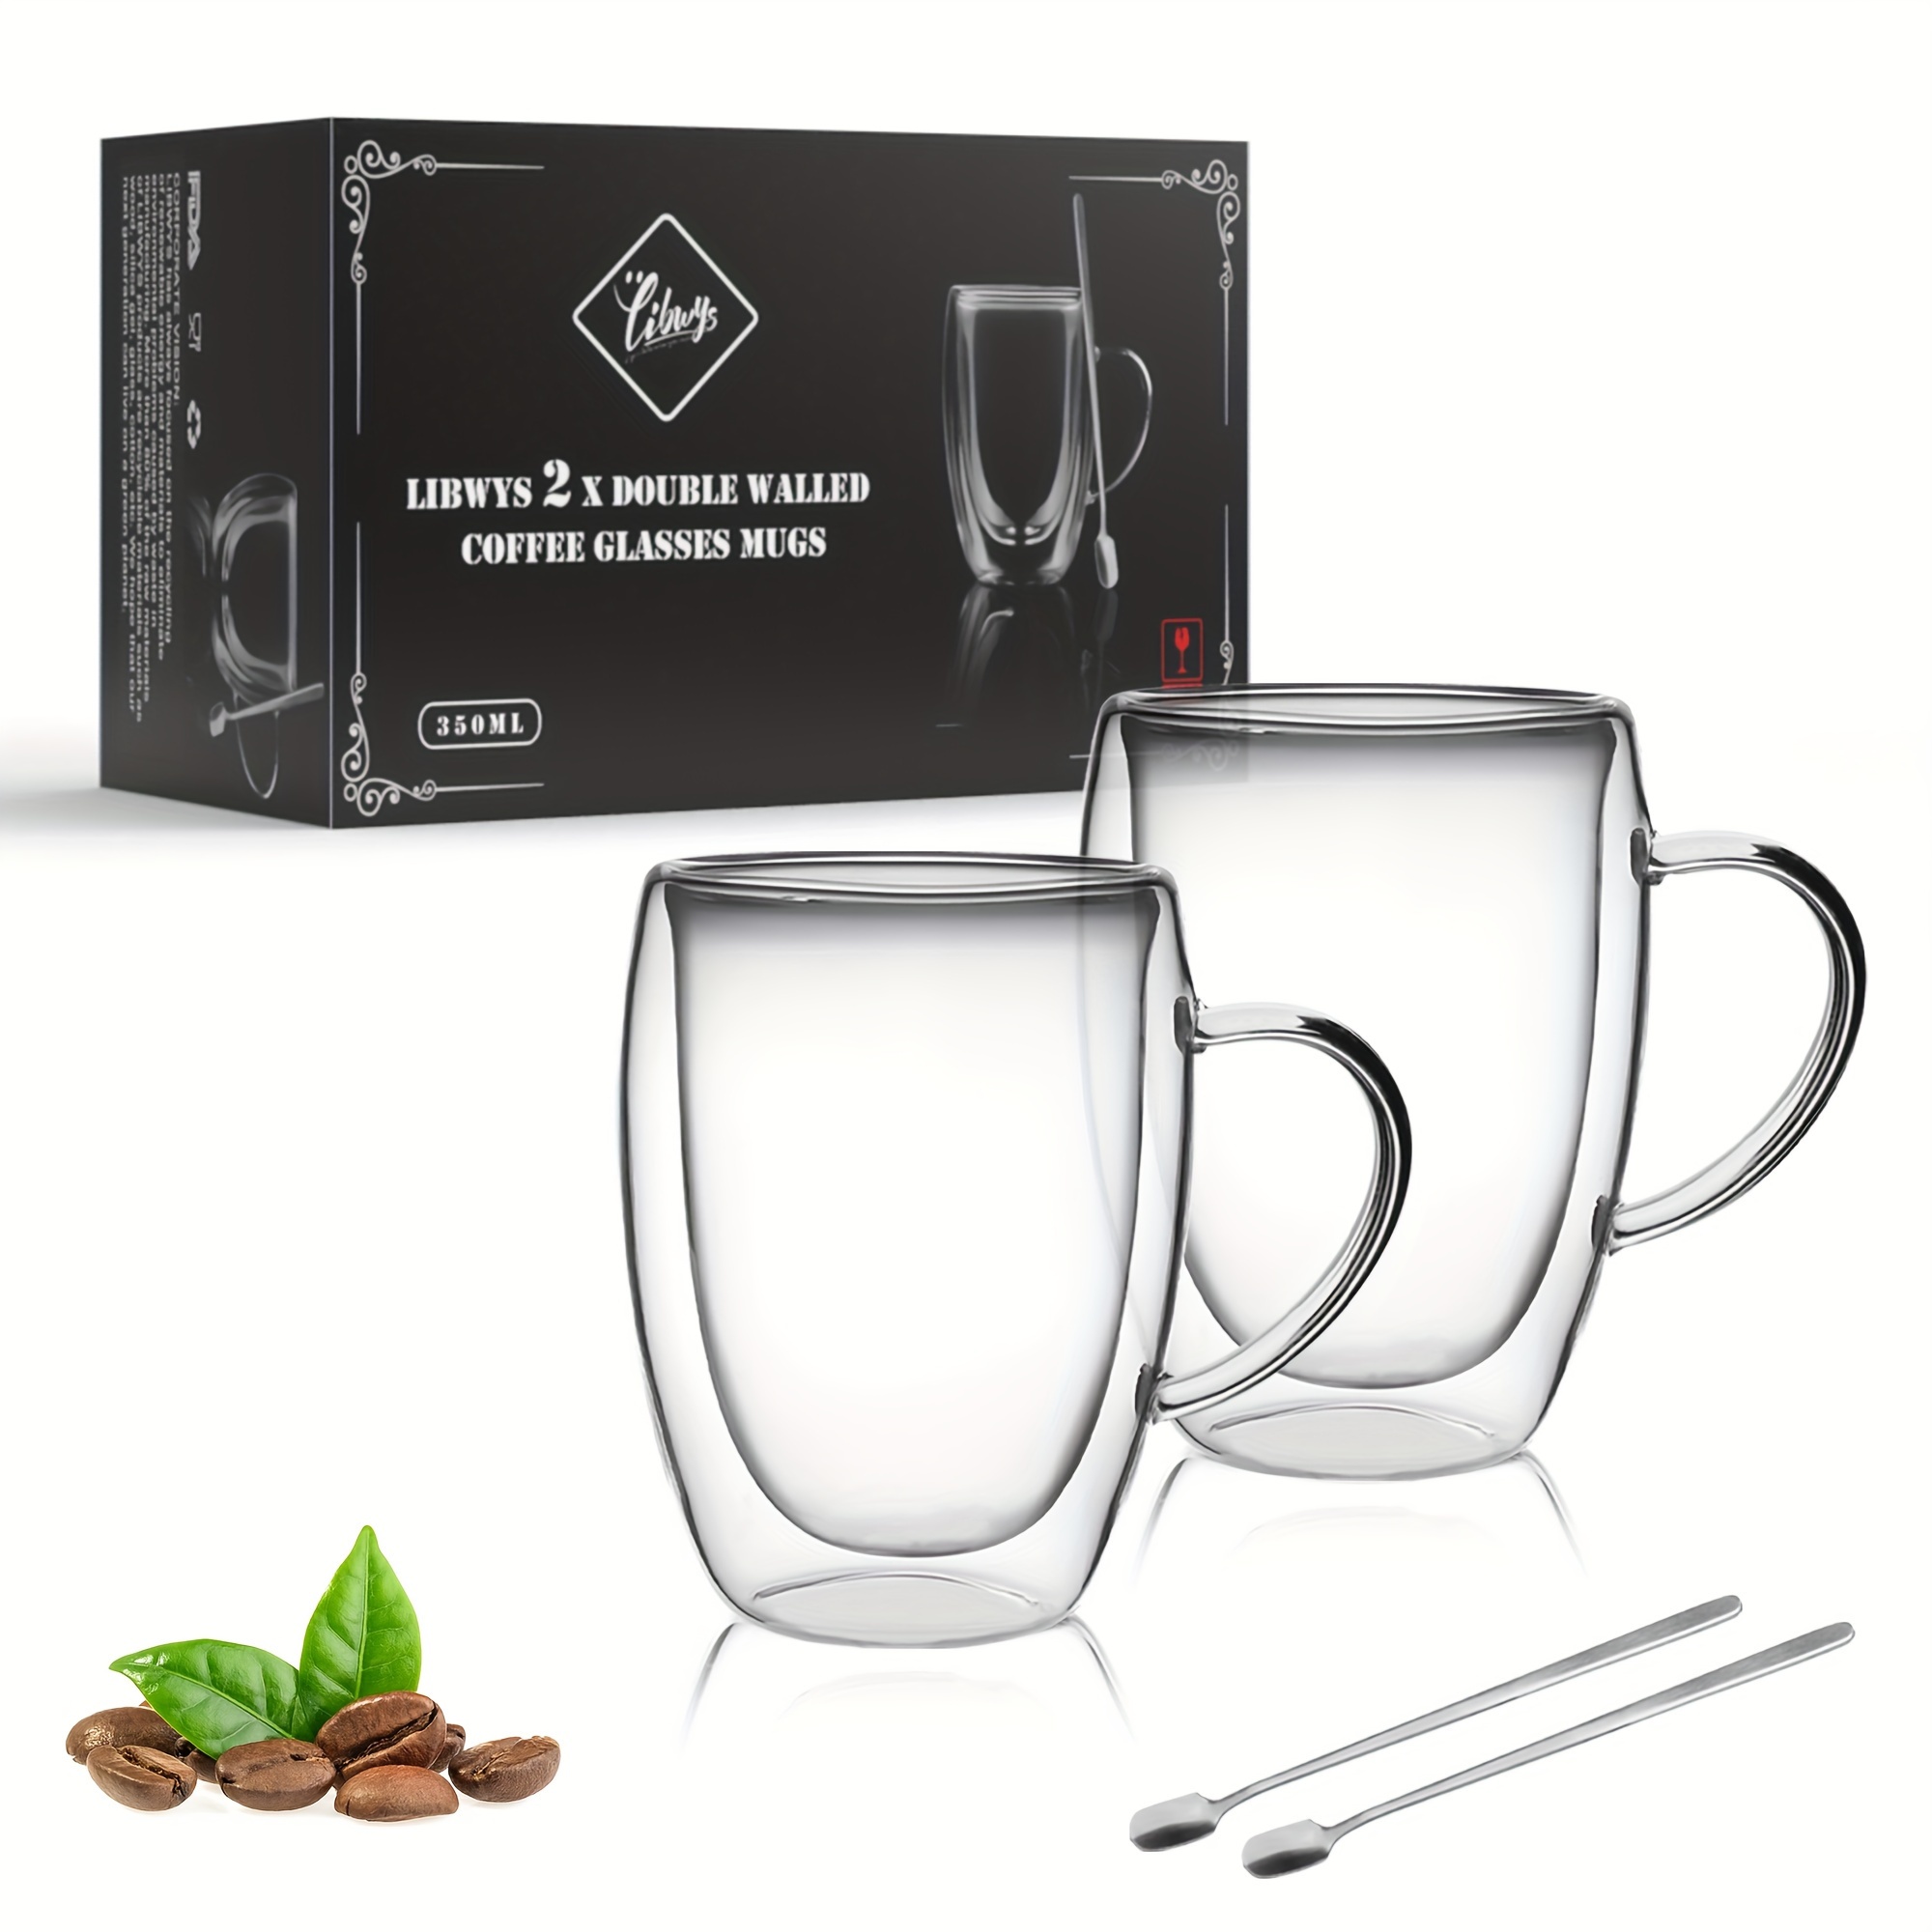 

2pcs/set, Libwys Double Walled Coffee Glasses 350ml With Spoon, Cappuccino Latte Tea Cups With Handle, Heat-resistant Coffee Cups